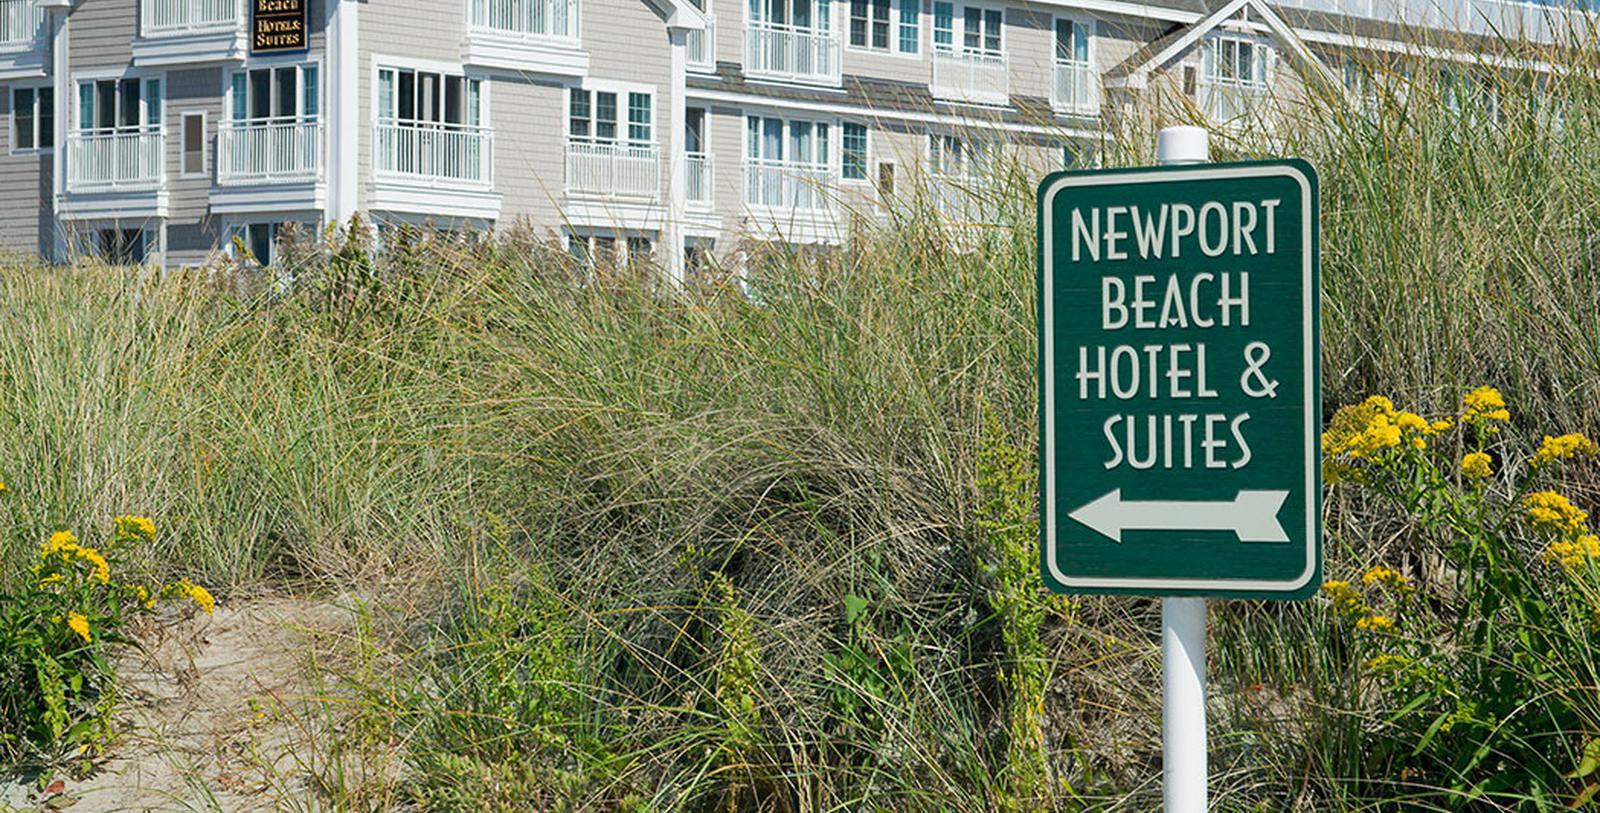 Discover the gambrel-style of the Newport Beach Hotel & Suites.